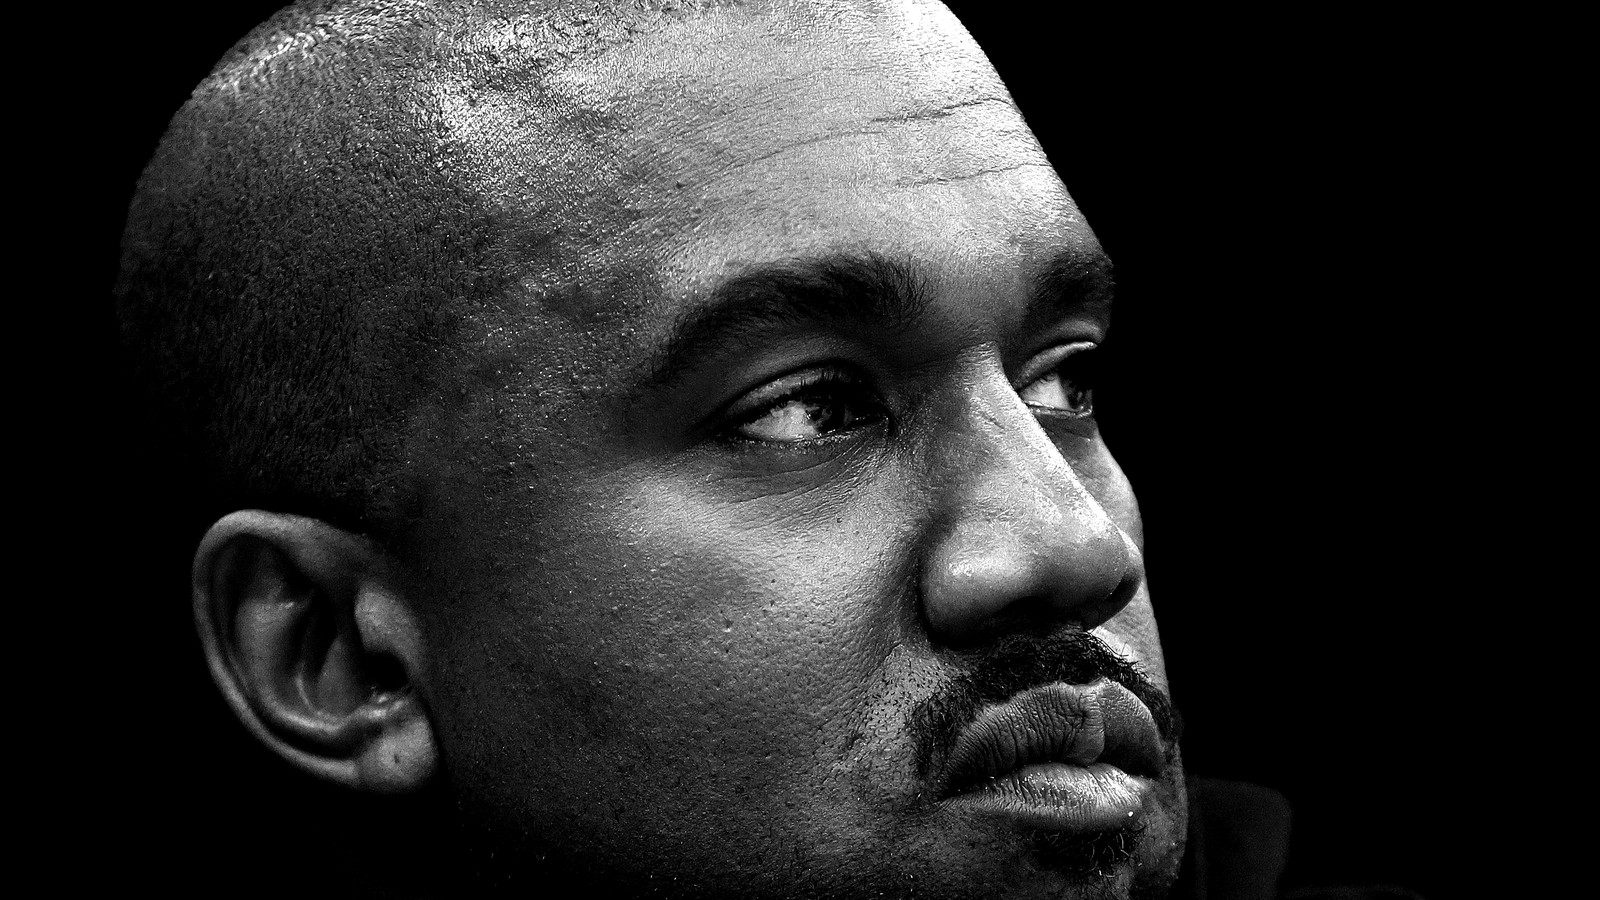 The Story of How Kanye Became Famous Will Make You Appreciate Him Even More